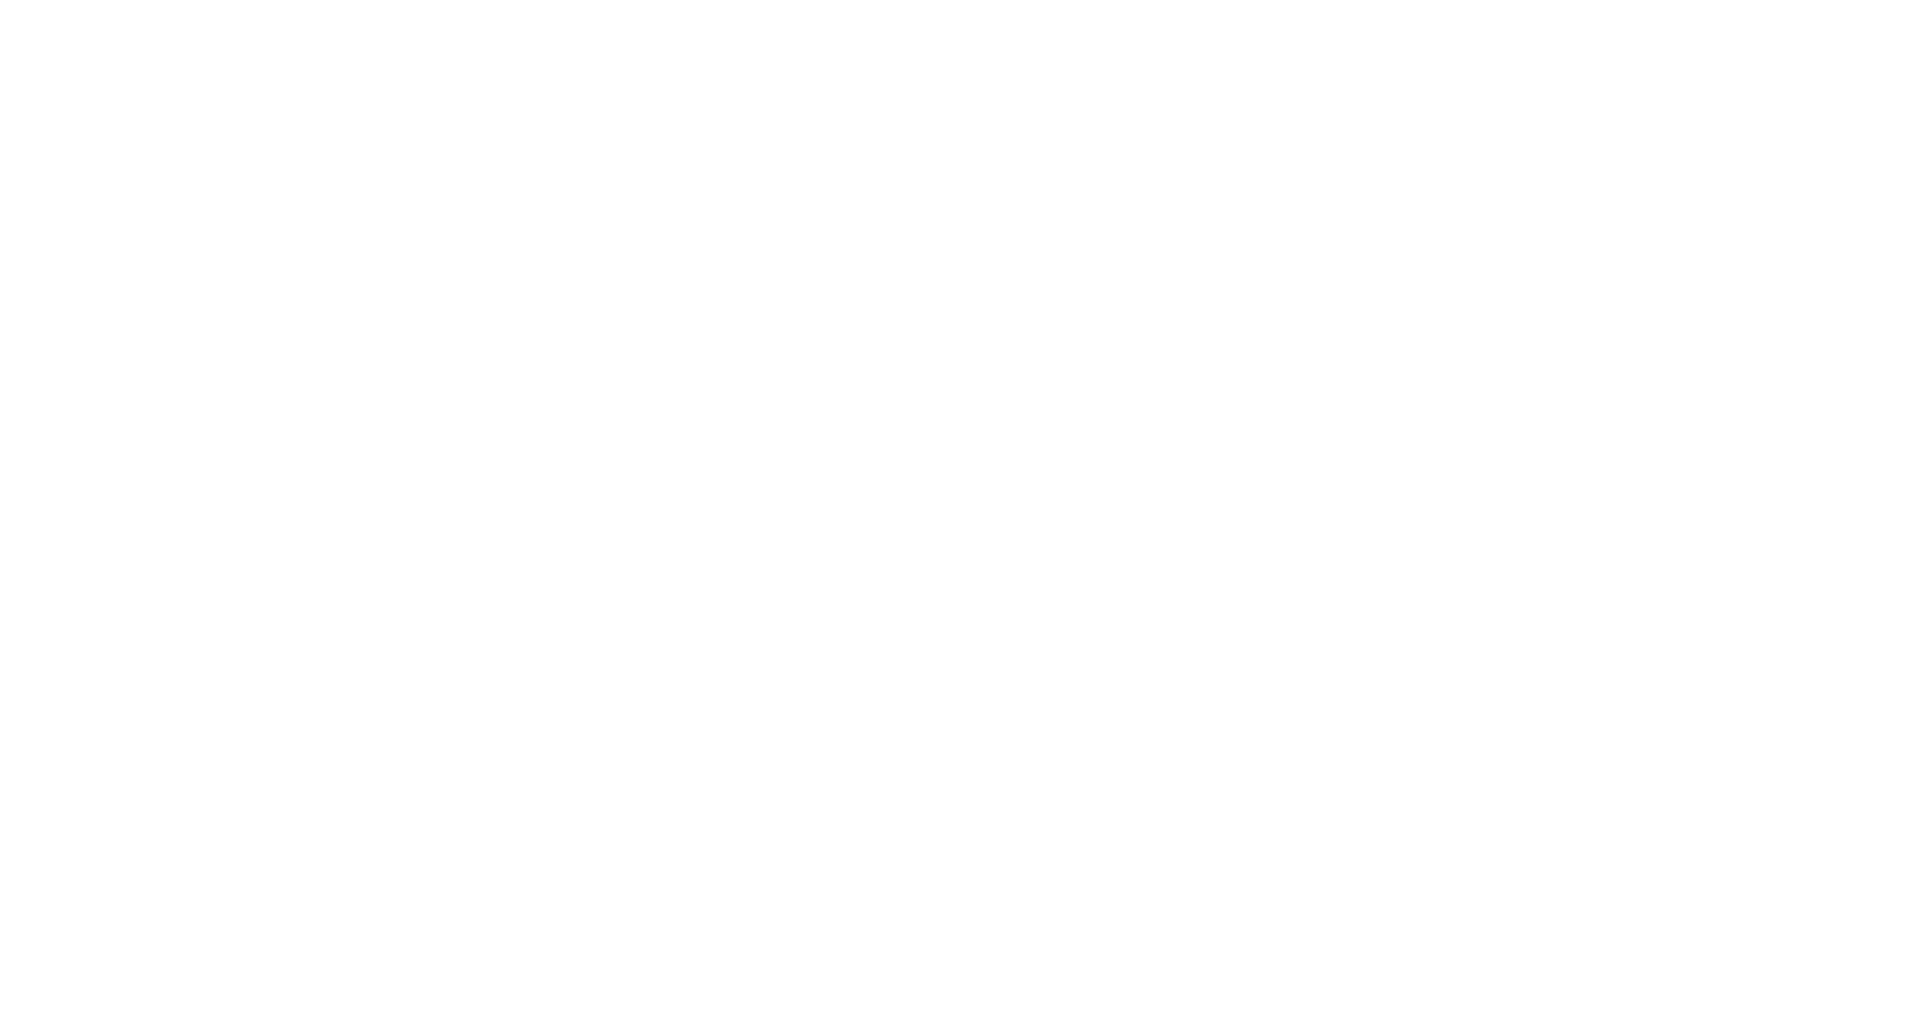 Authorized Roofing Contractor in Buffalo, NY, USA - Naples Roofing